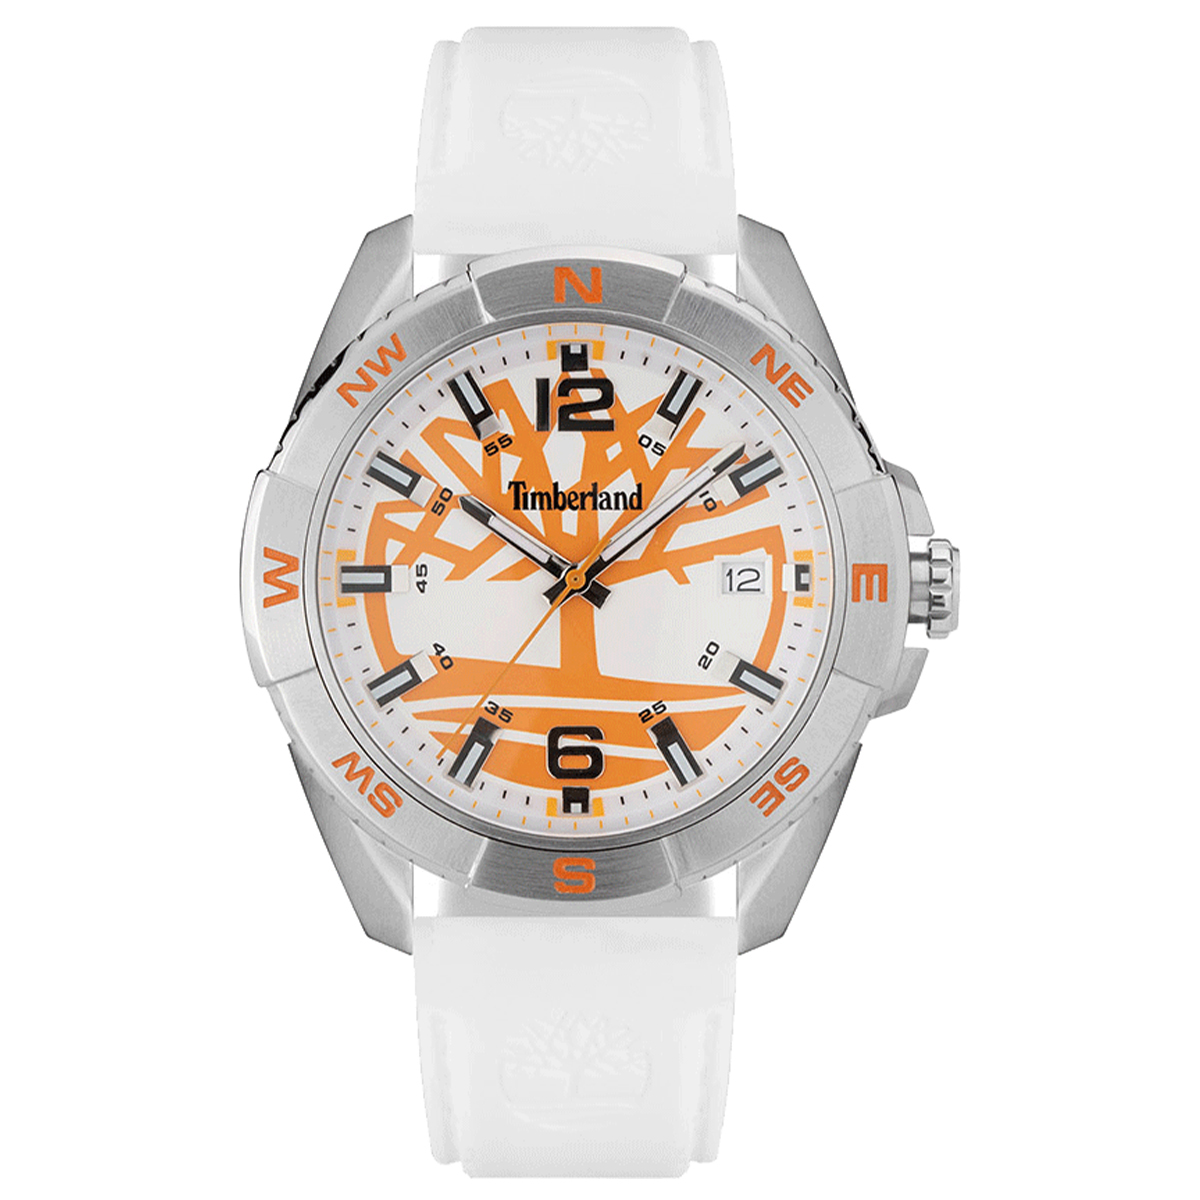 MONTRE TIMBERLAND HOMME SIMPLE SILICONE